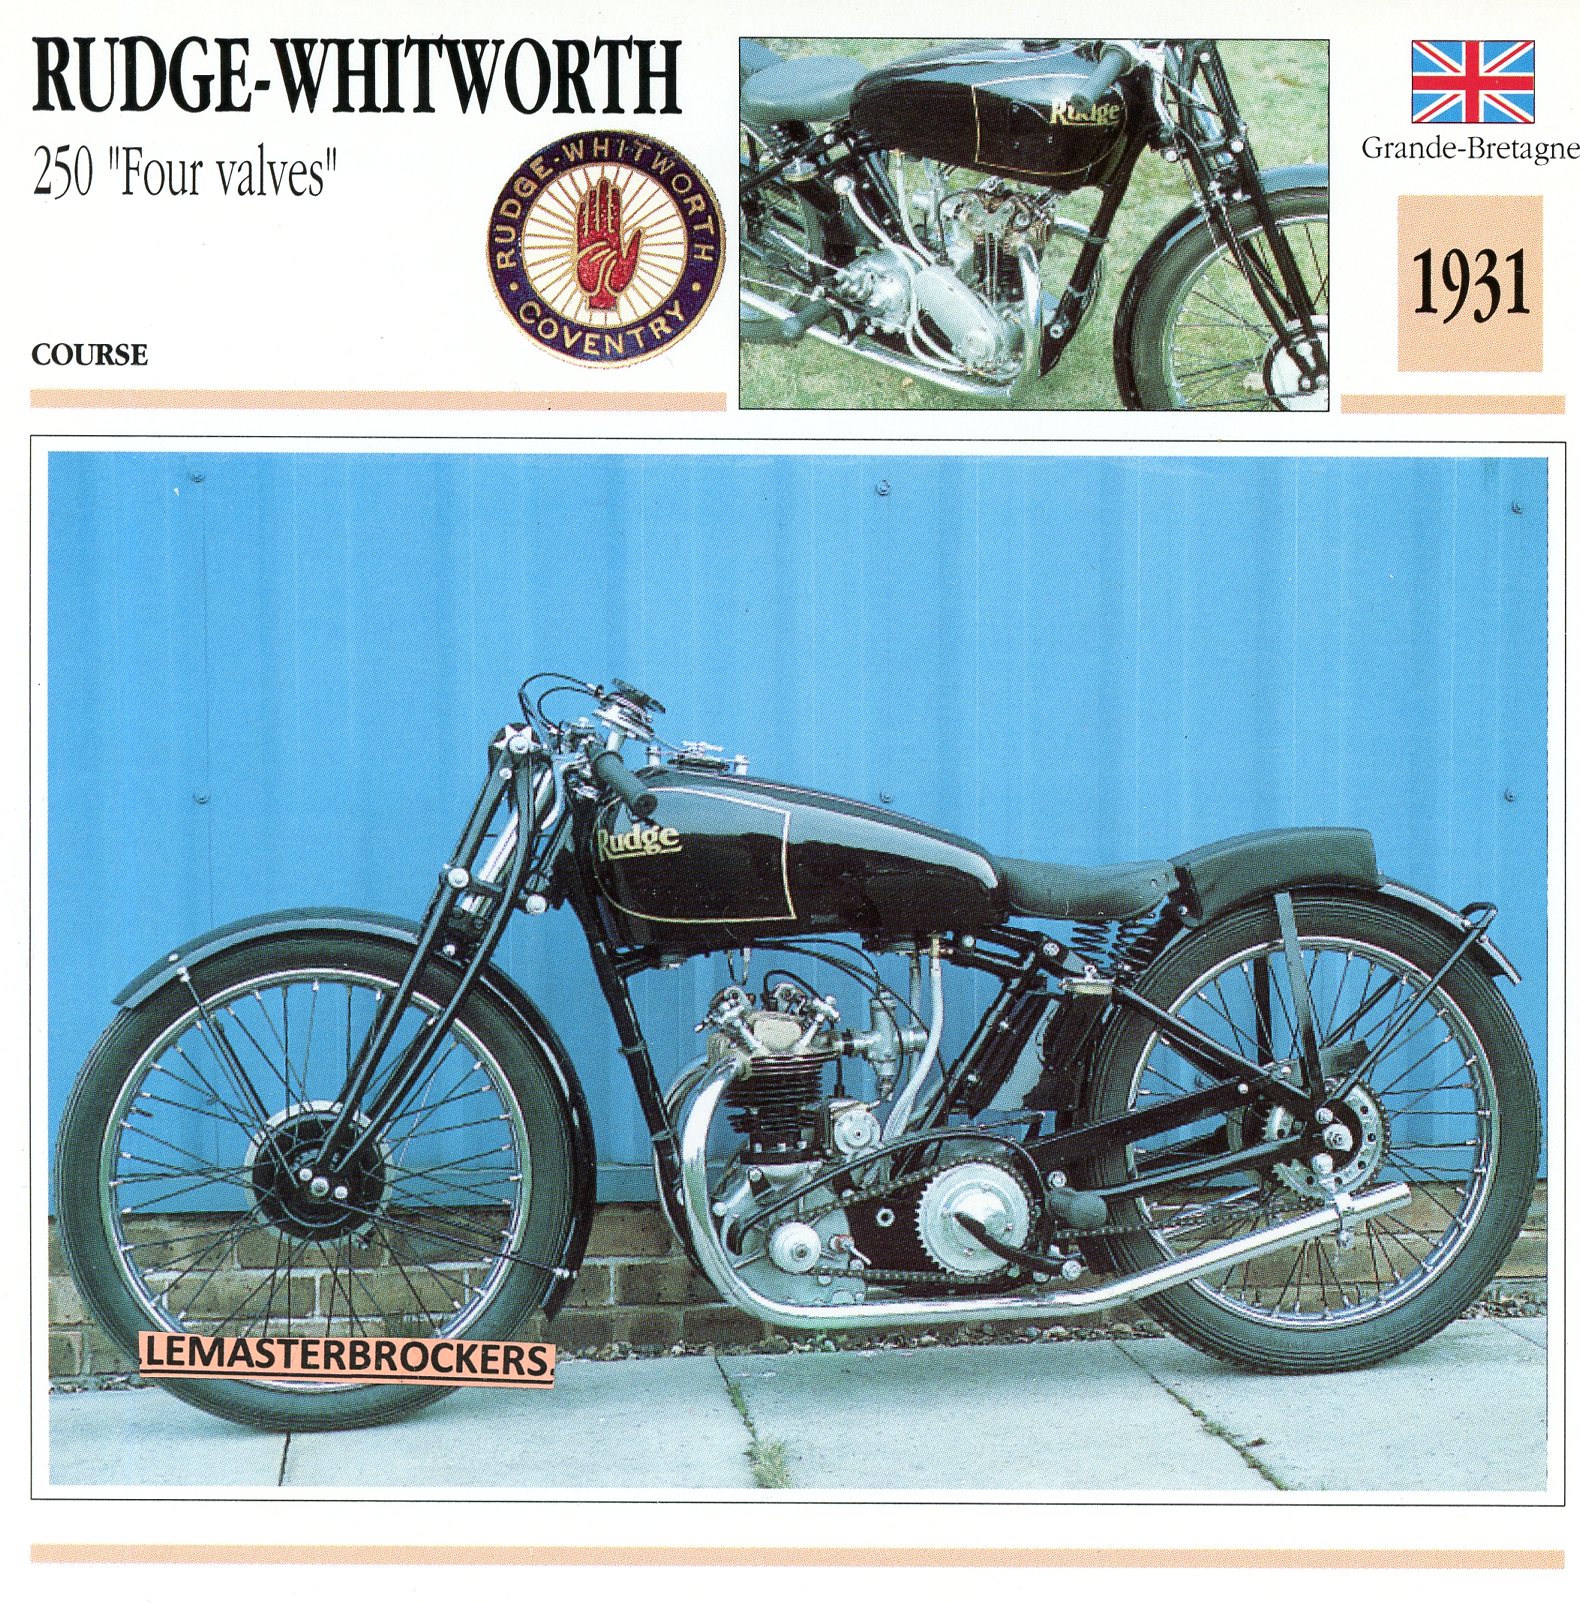 RUDGE-WHITWORTH-250-FOUR-VALVES-1931-FICHE-MOTO-LEMASTERBROCKERS-CARD-MOTORCYCLE